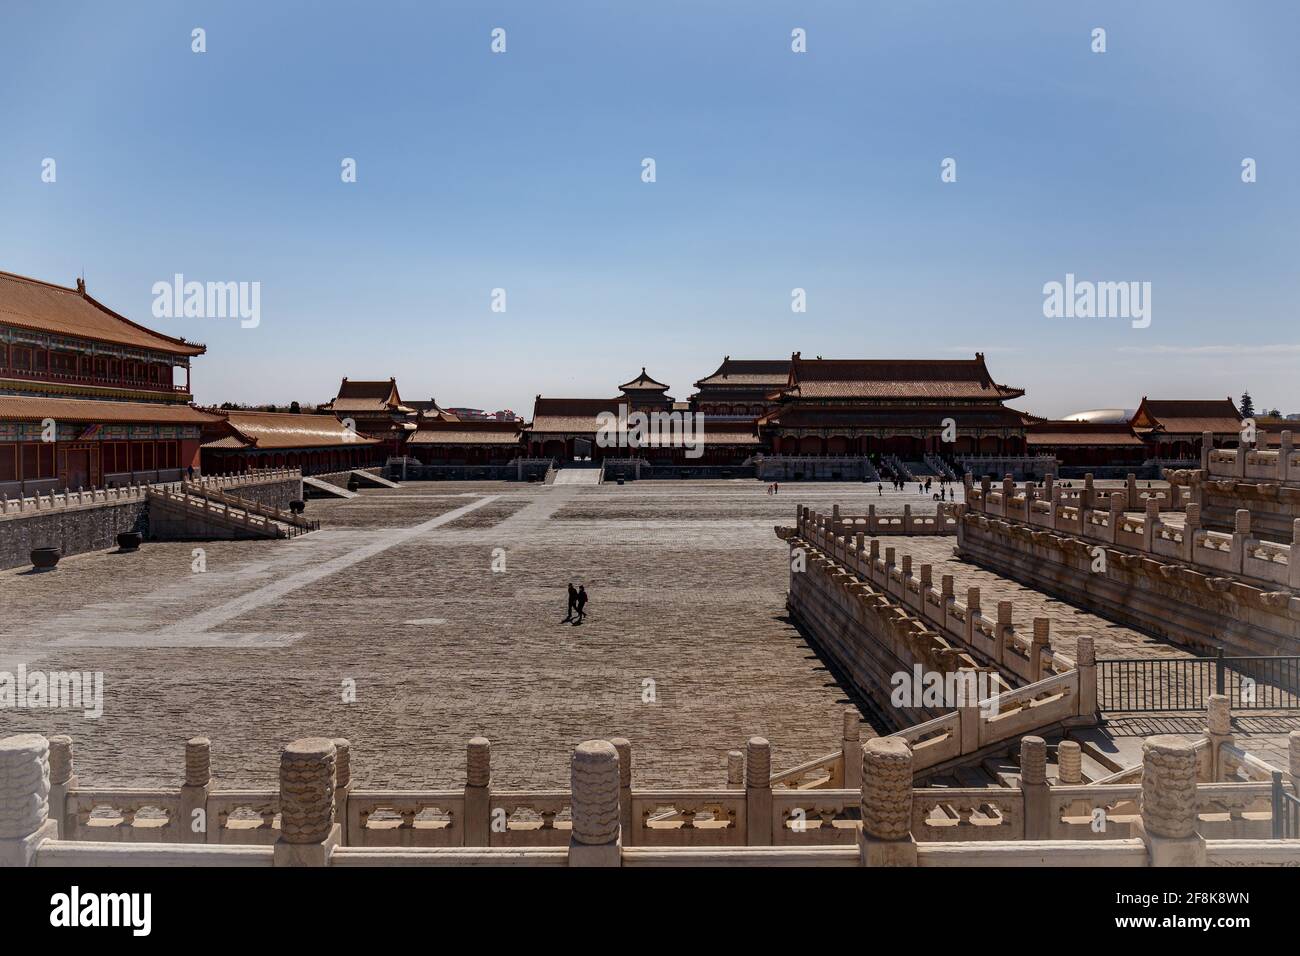 Giant open spaces of the Forbidden City in Beijing, China in March 2018. Stock Photo